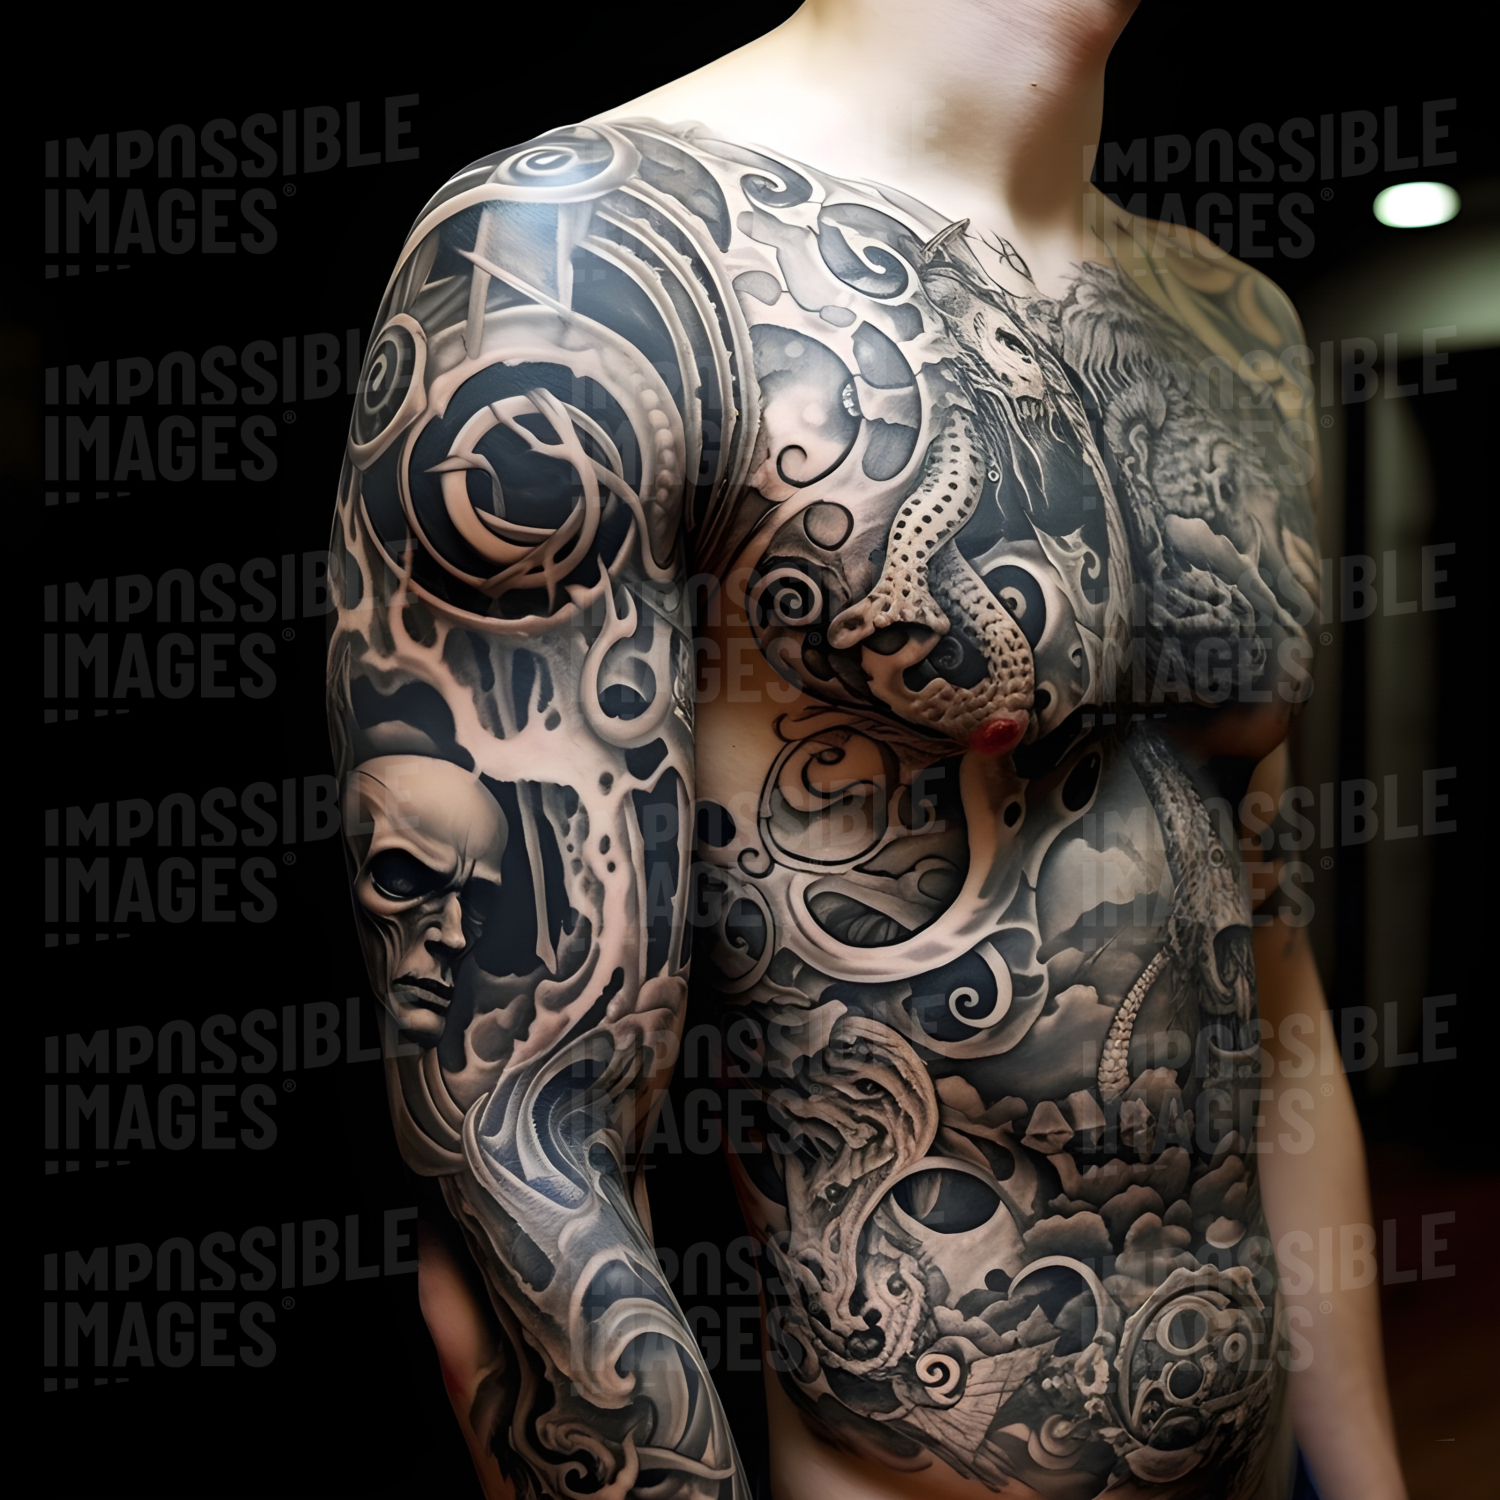 Super intricate tattoo covering a man's arm and torso